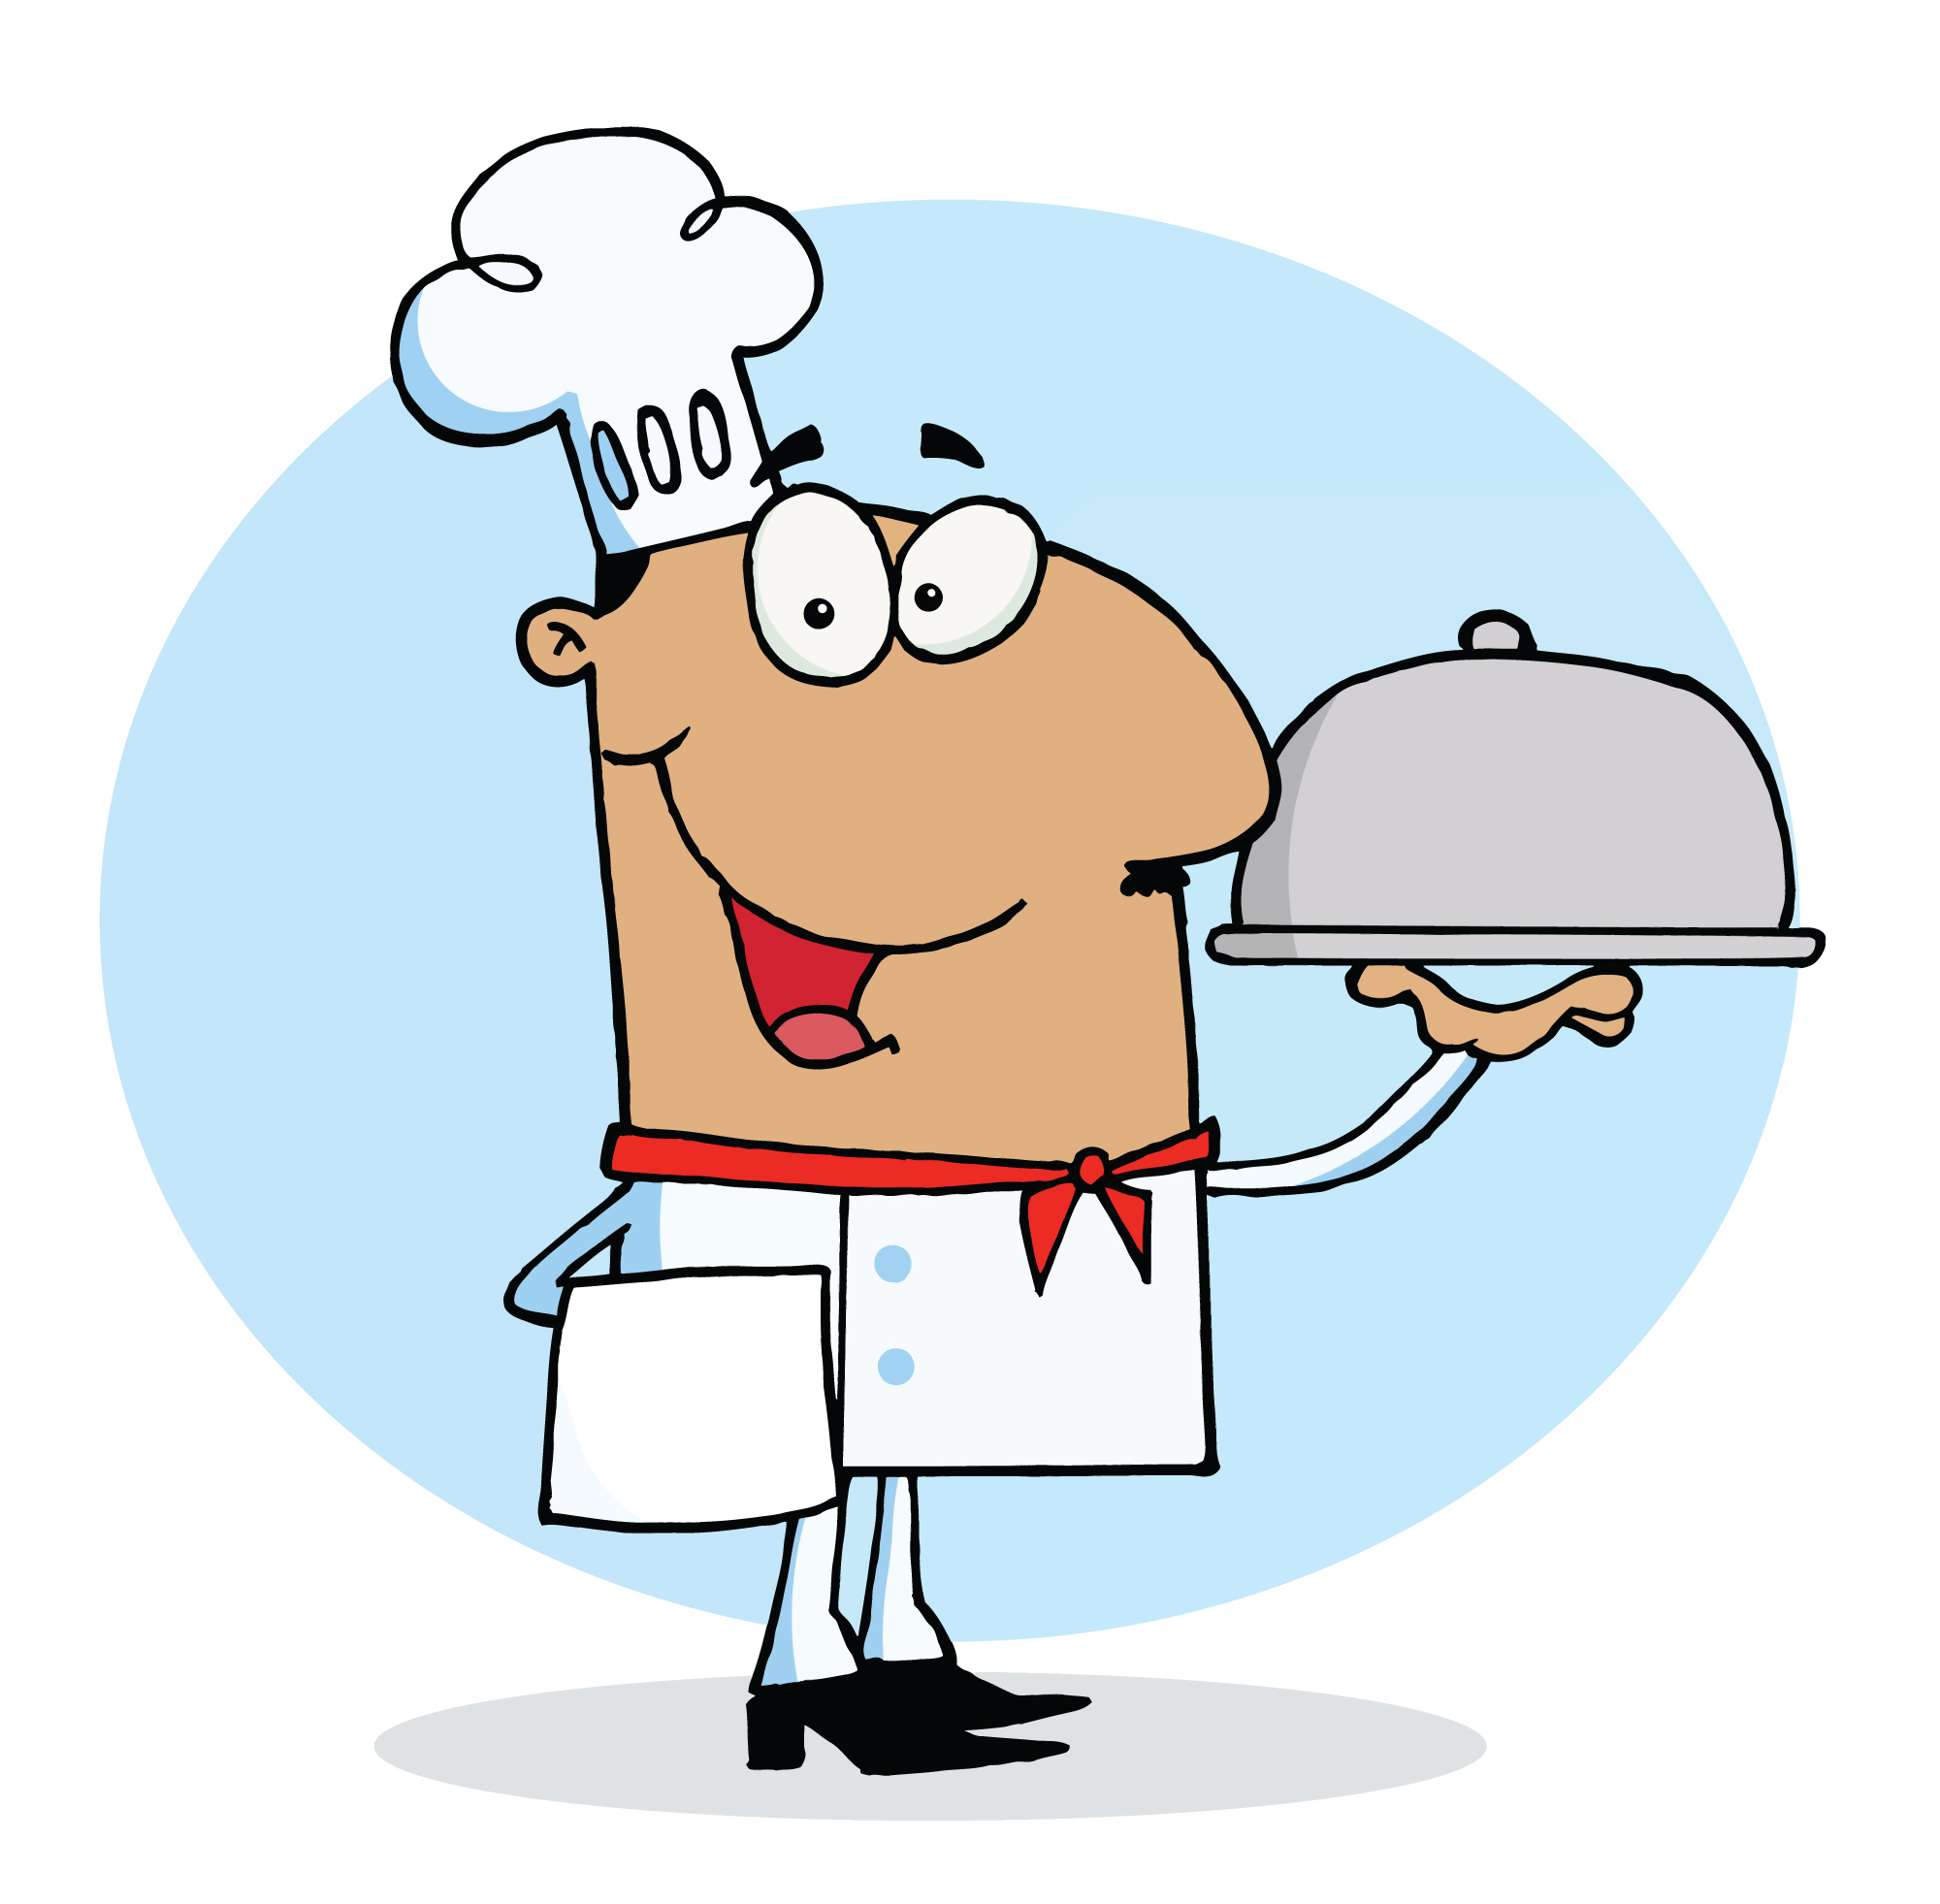 Cooking download chef clip art free clipart of chefs cooks 2 2